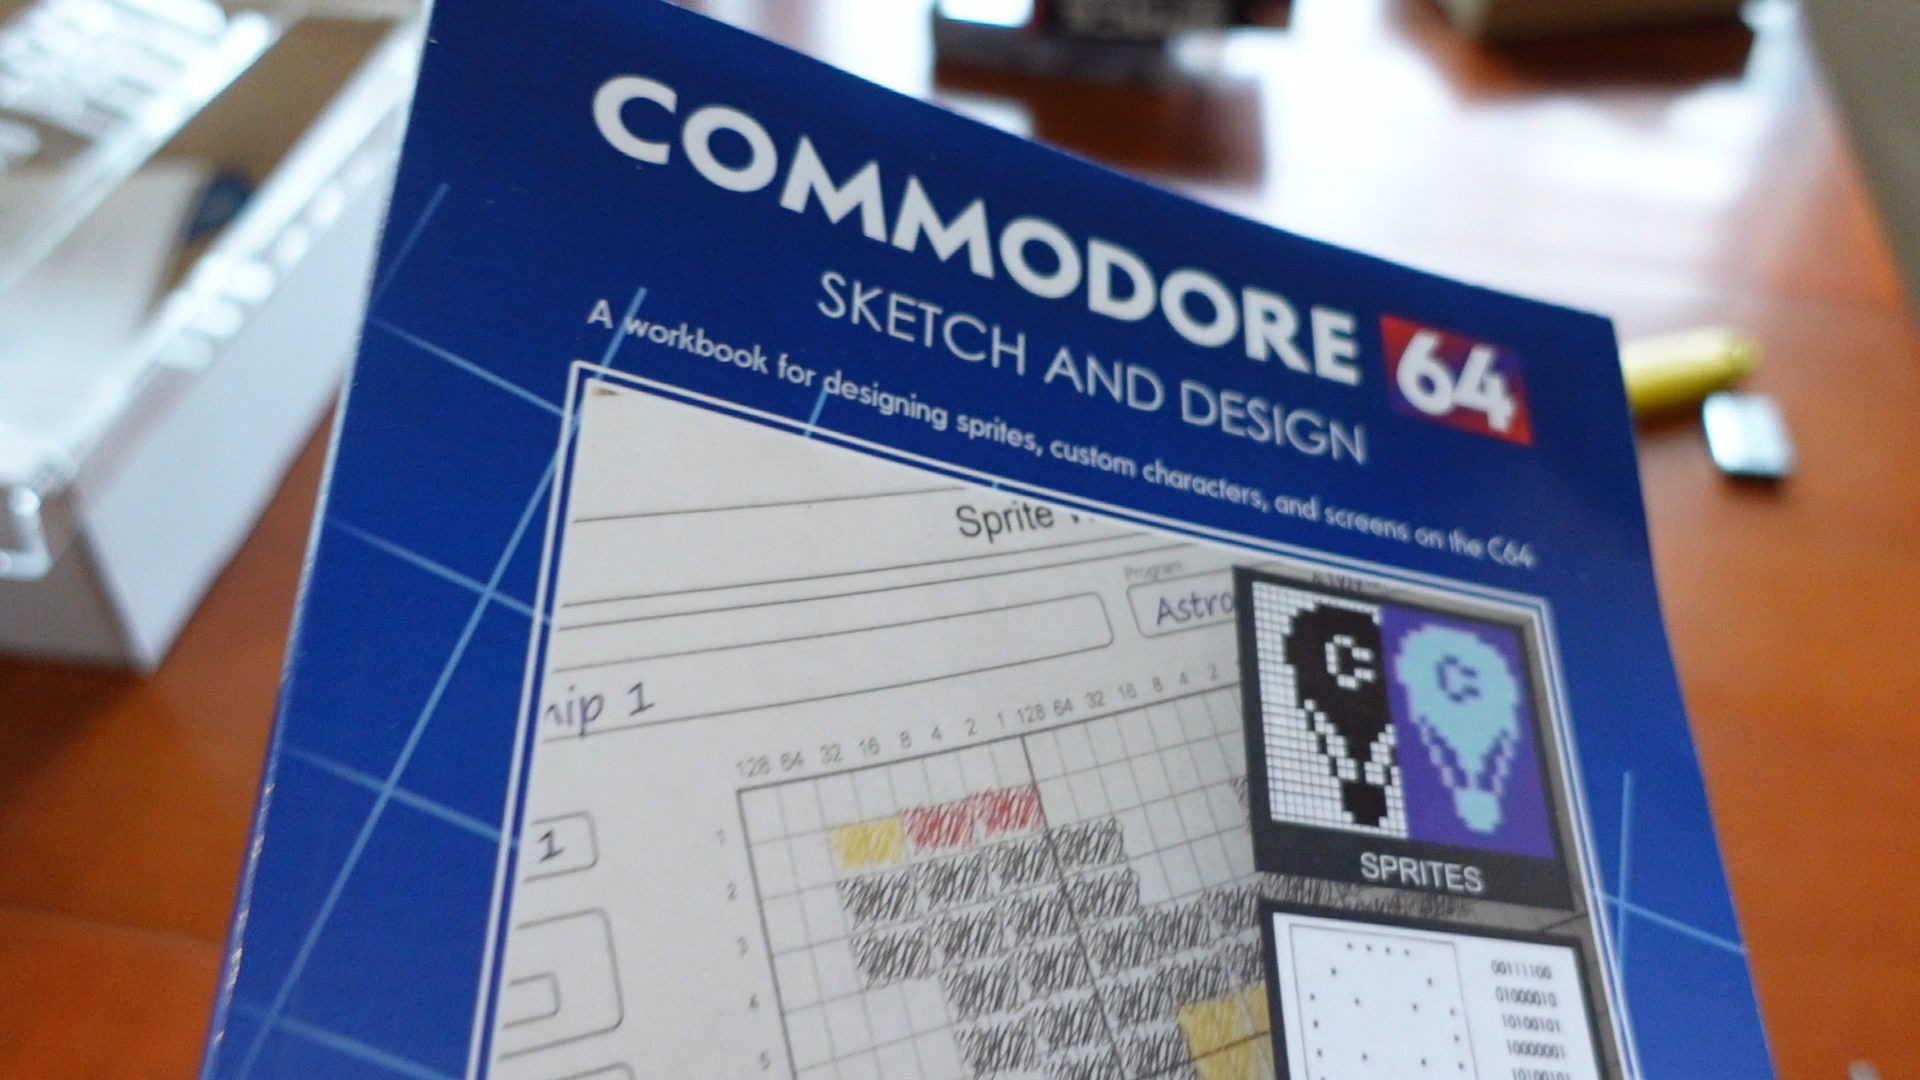 C64 Sketch and Design Book Review